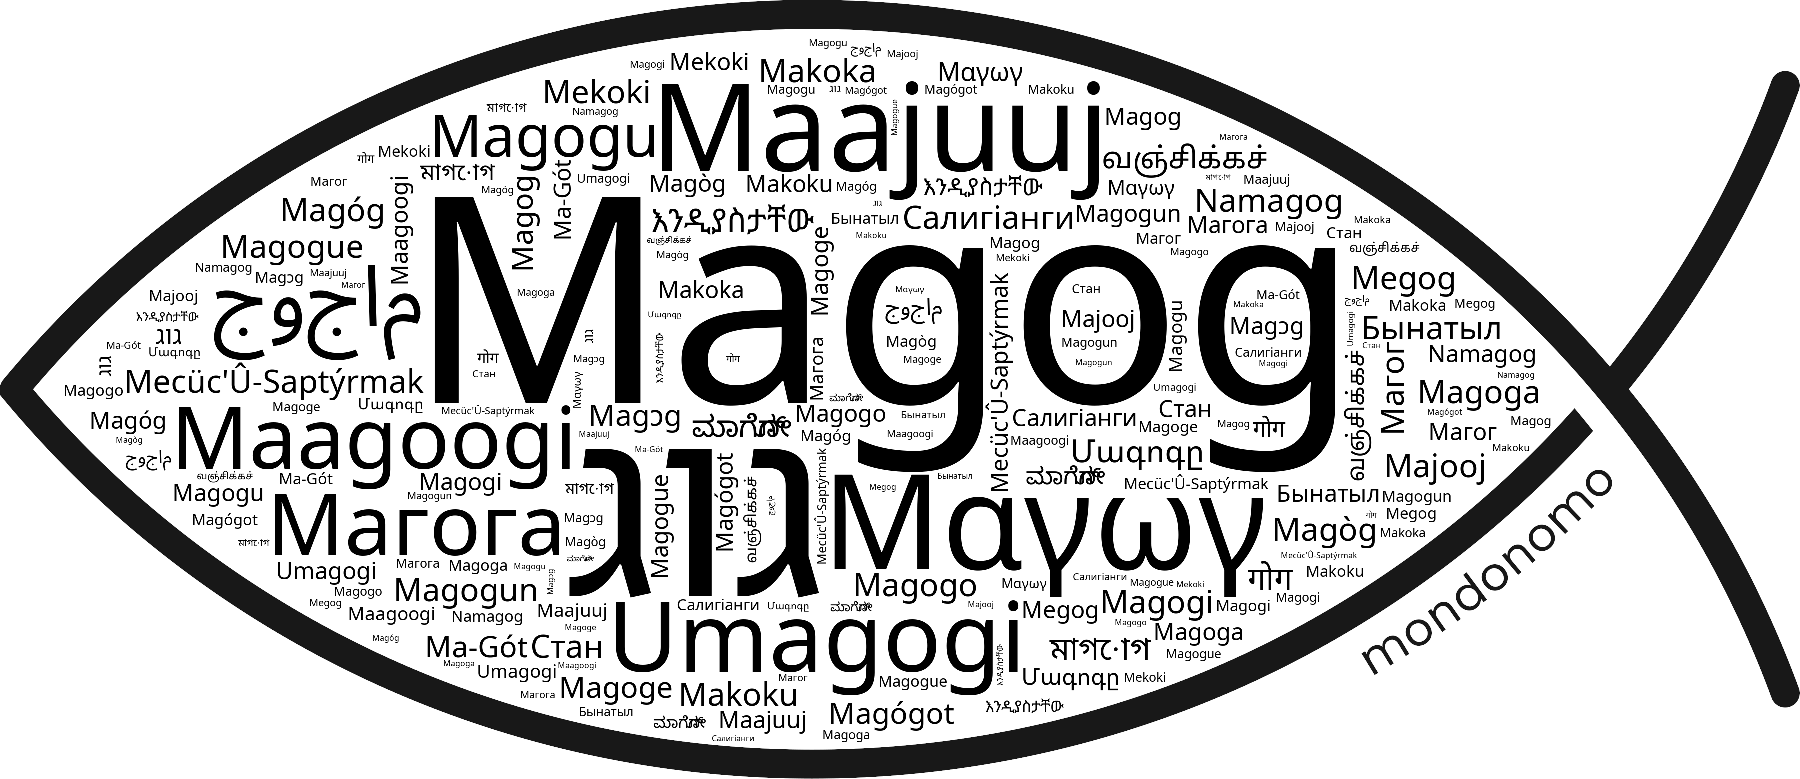 Name Magog in the world's Bibles